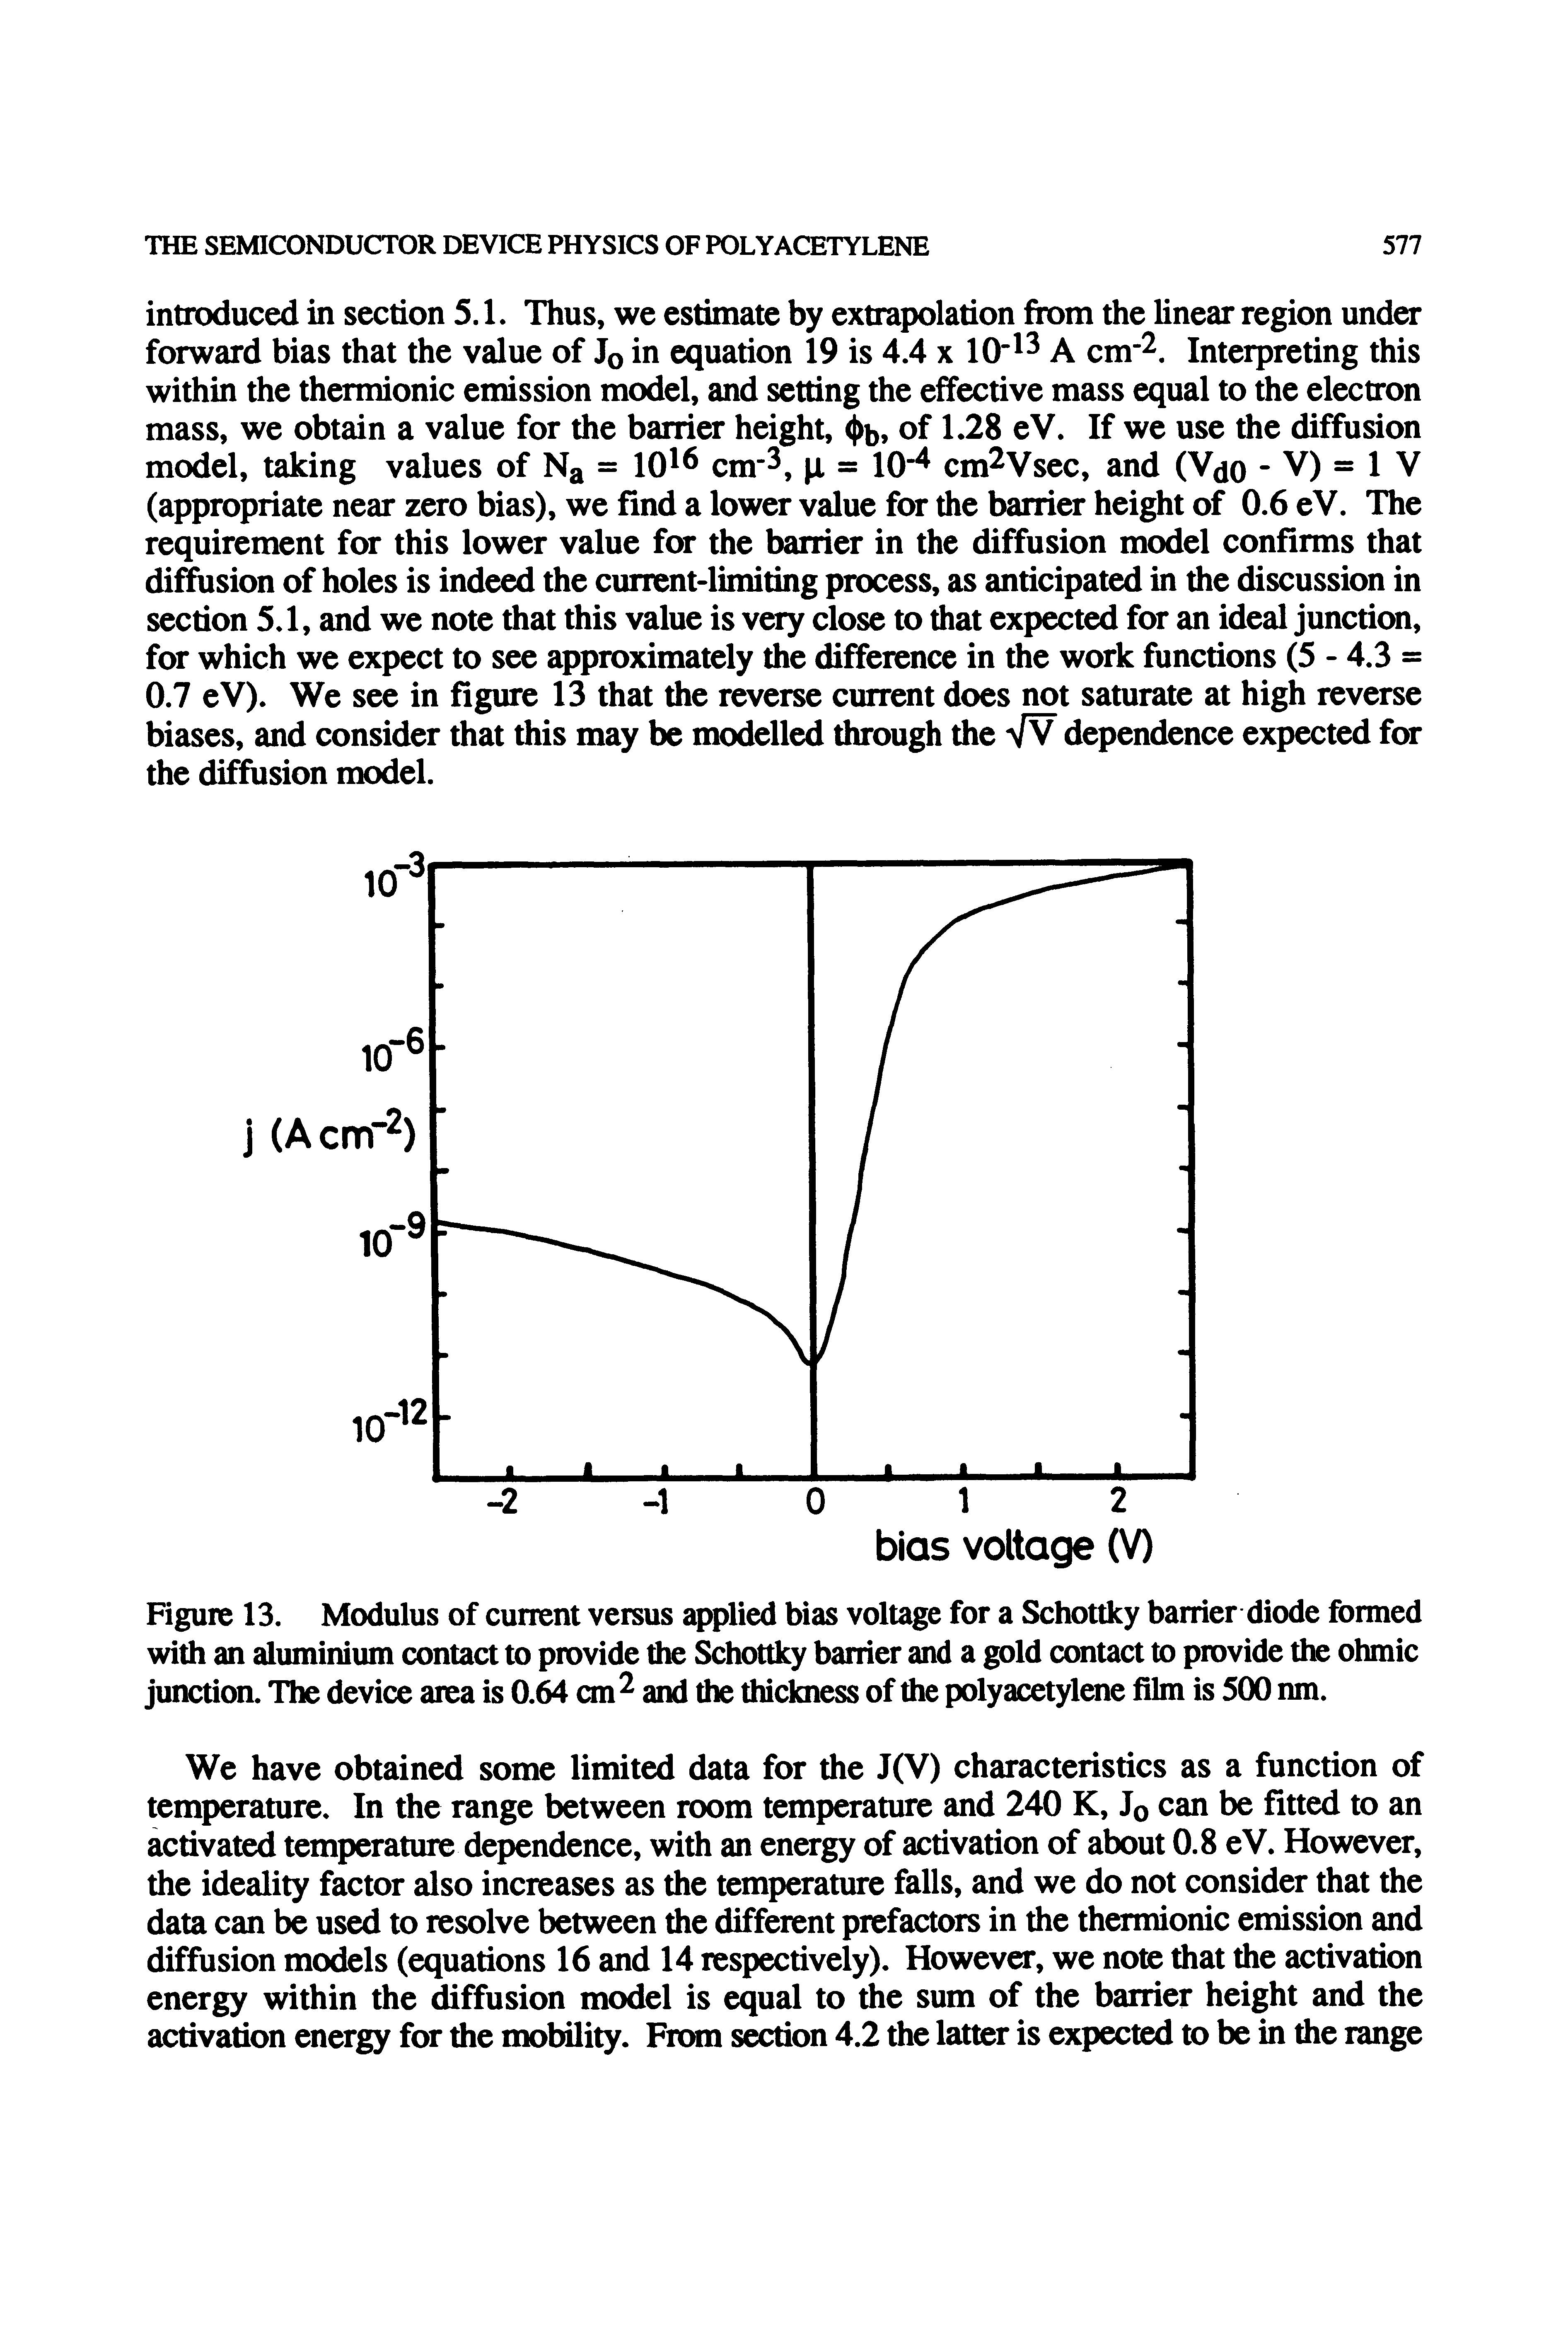 Figure 13. Modulus of current versus implied bias voltage for a Schottky barrier diode formed with an aluminium contact to provide the hottky barrier and a gold contact to provide the ohmic junctioa The device area is 0.64 cm and the thickness of the polyacetyloie film is 500 nm.